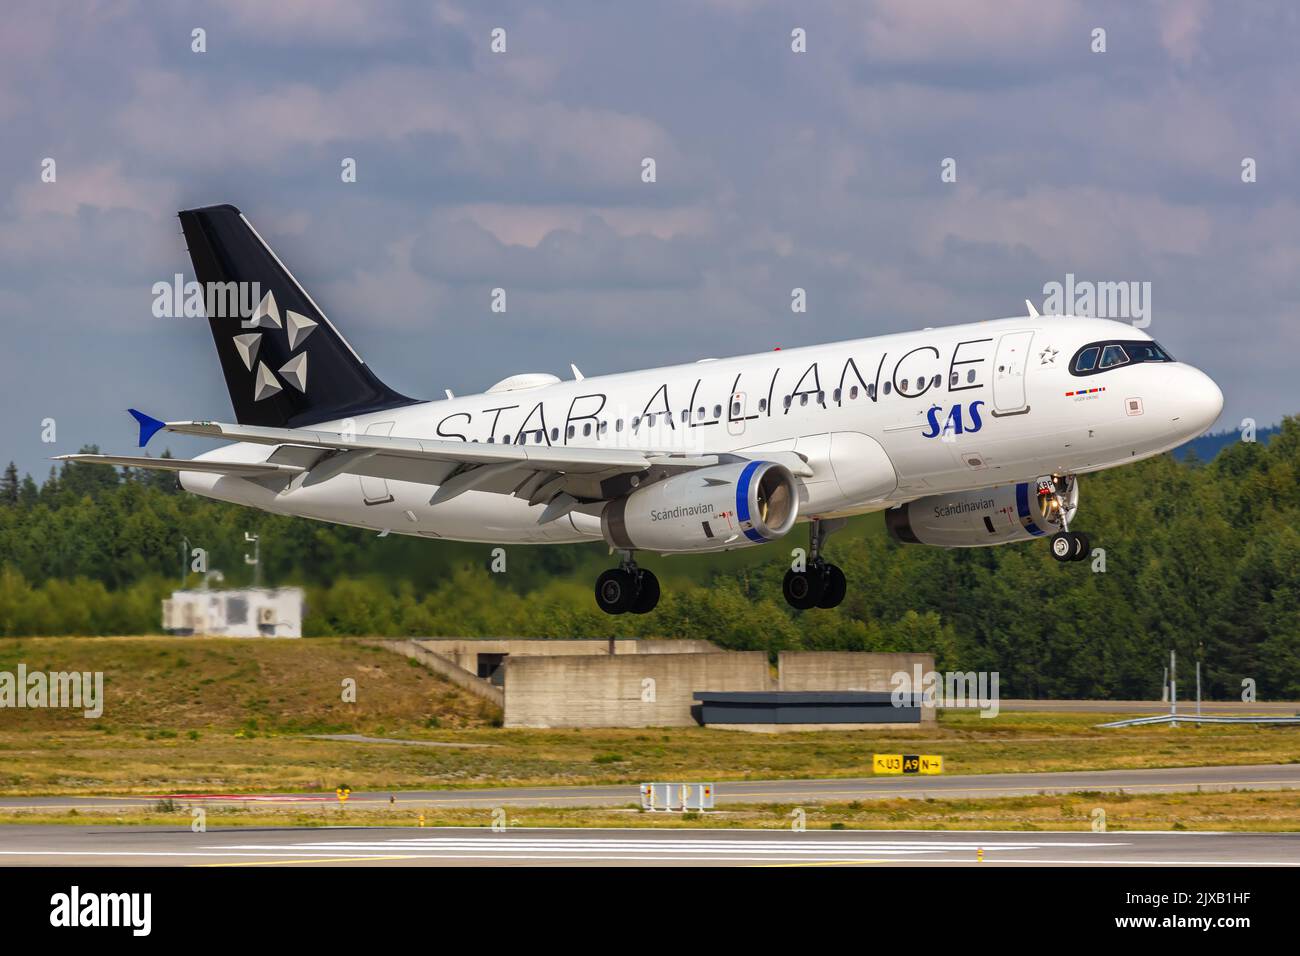 Oslo, Norway - August 15, 2022: SAS Scandinavian Airlines Airbus A319 airplane with Star Alliance special livery at Oslo airport (OSL) in Norway. Stock Photo